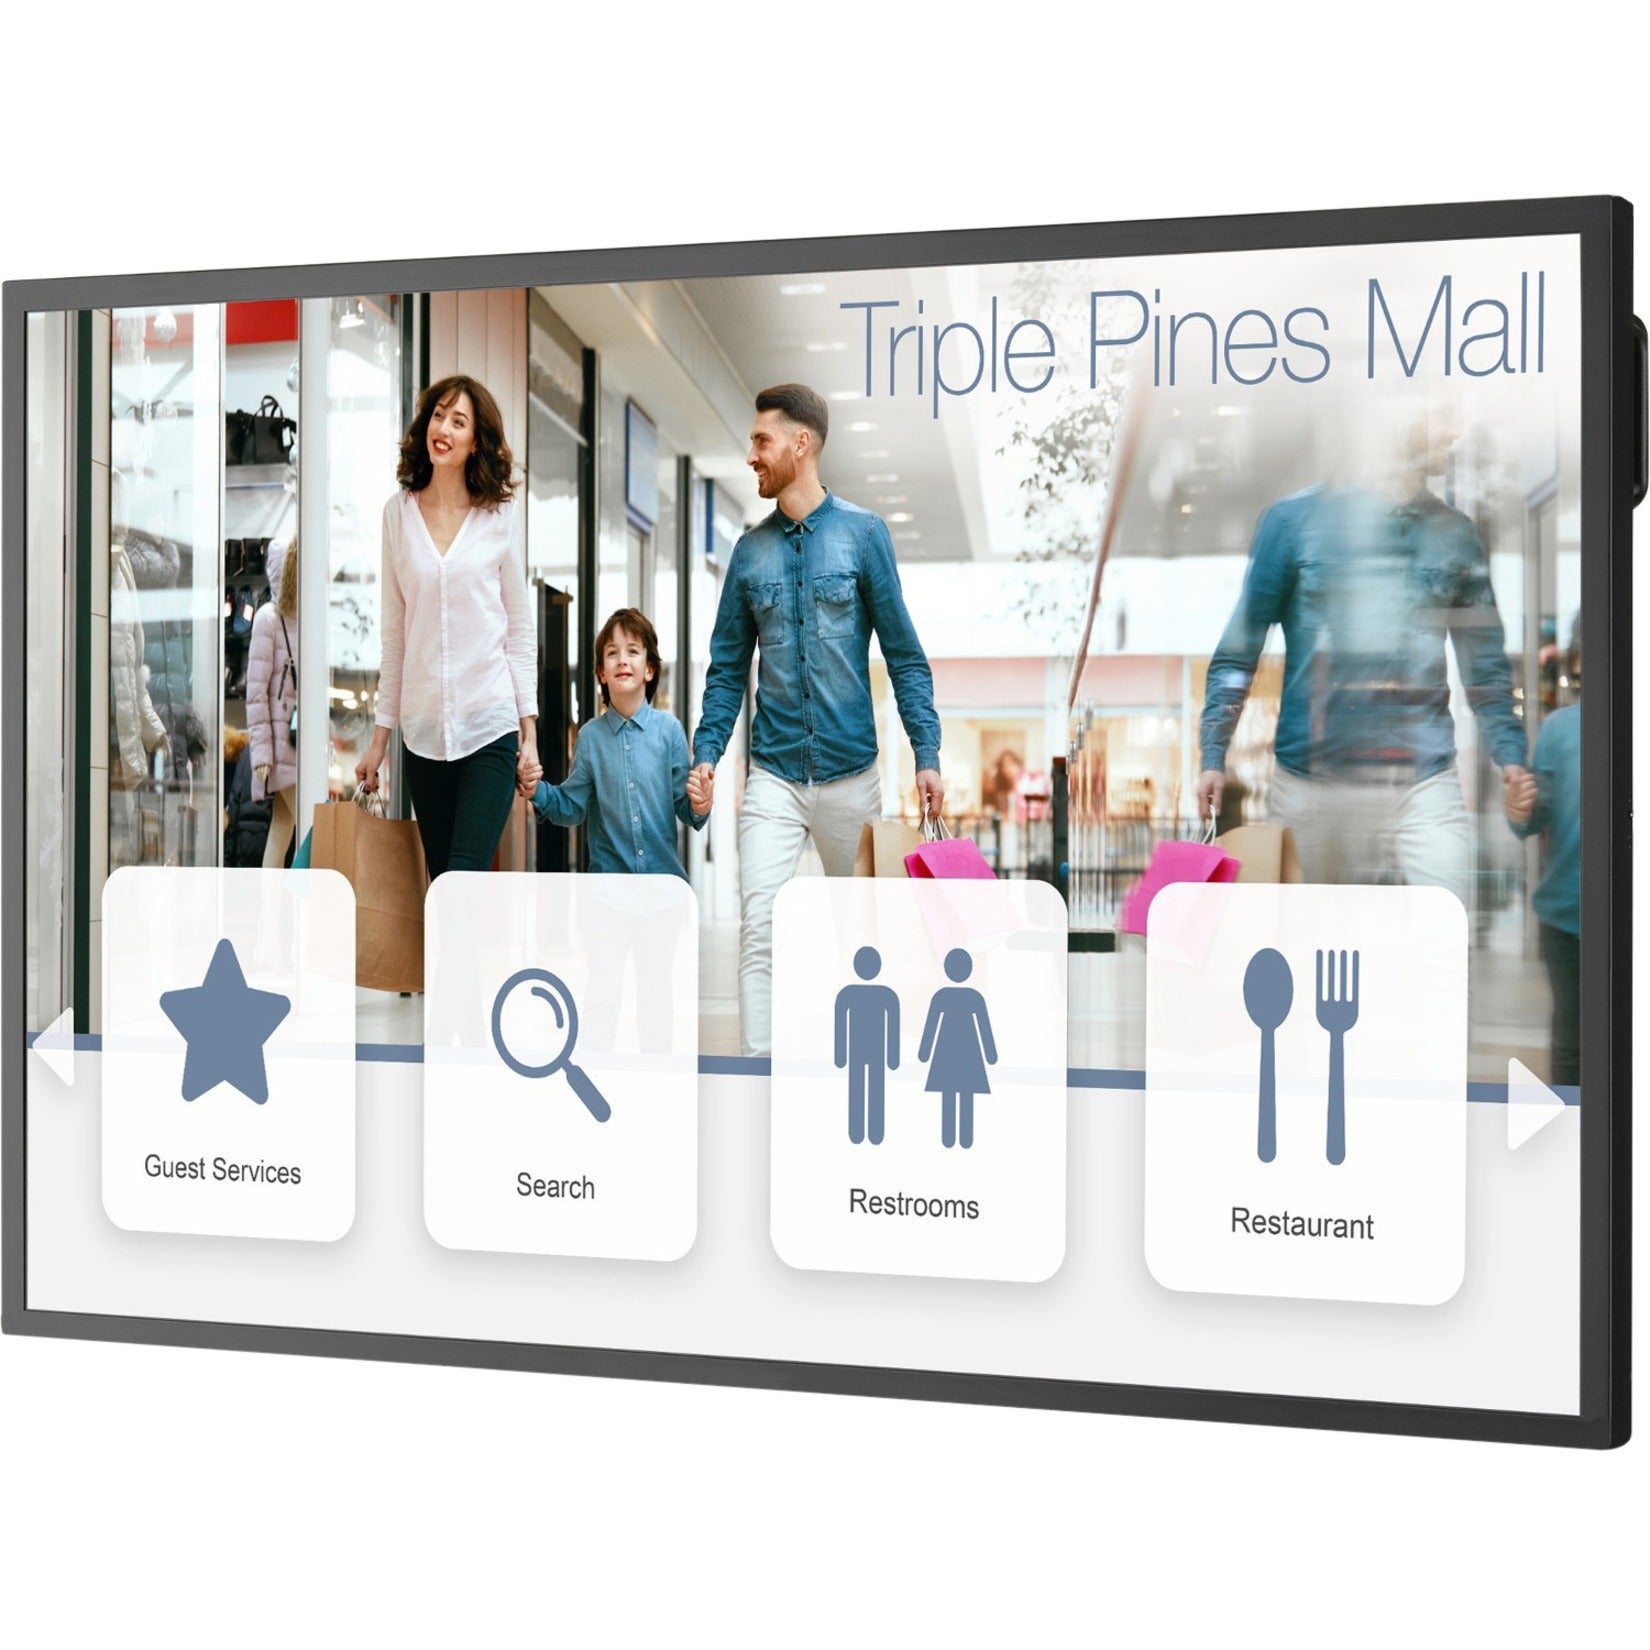 Sharp NEC Display ME651-IR 65" Ultra High Definition Commercial Display with Pre-installed IR Touch, 10 Touchpoints, 400 Nit, 2160p [Discontinued]